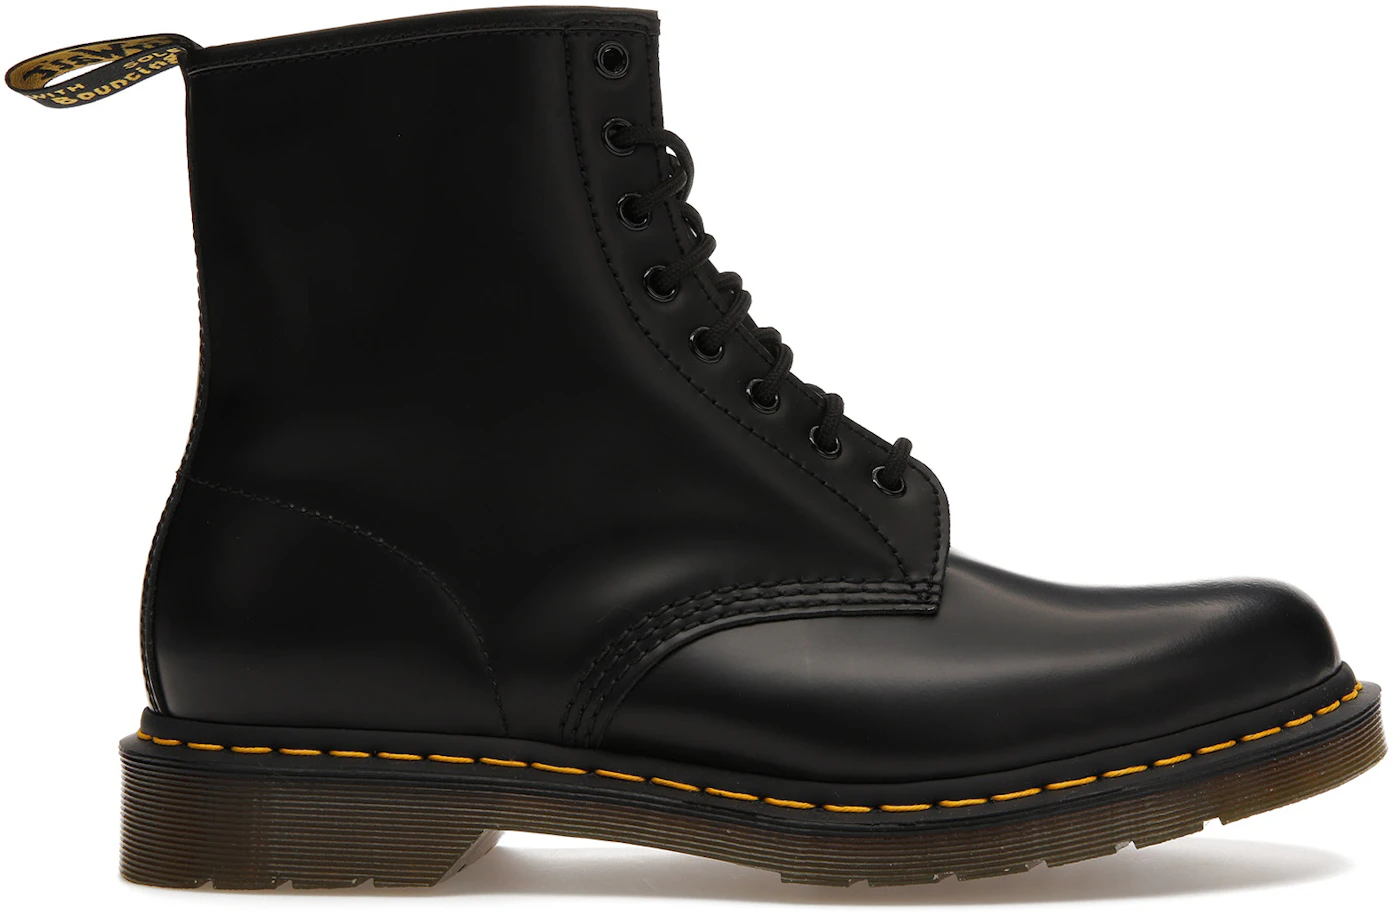 Louis Vuitton X Dr Martens 1460 Pascal Leather Lace Up Boots in